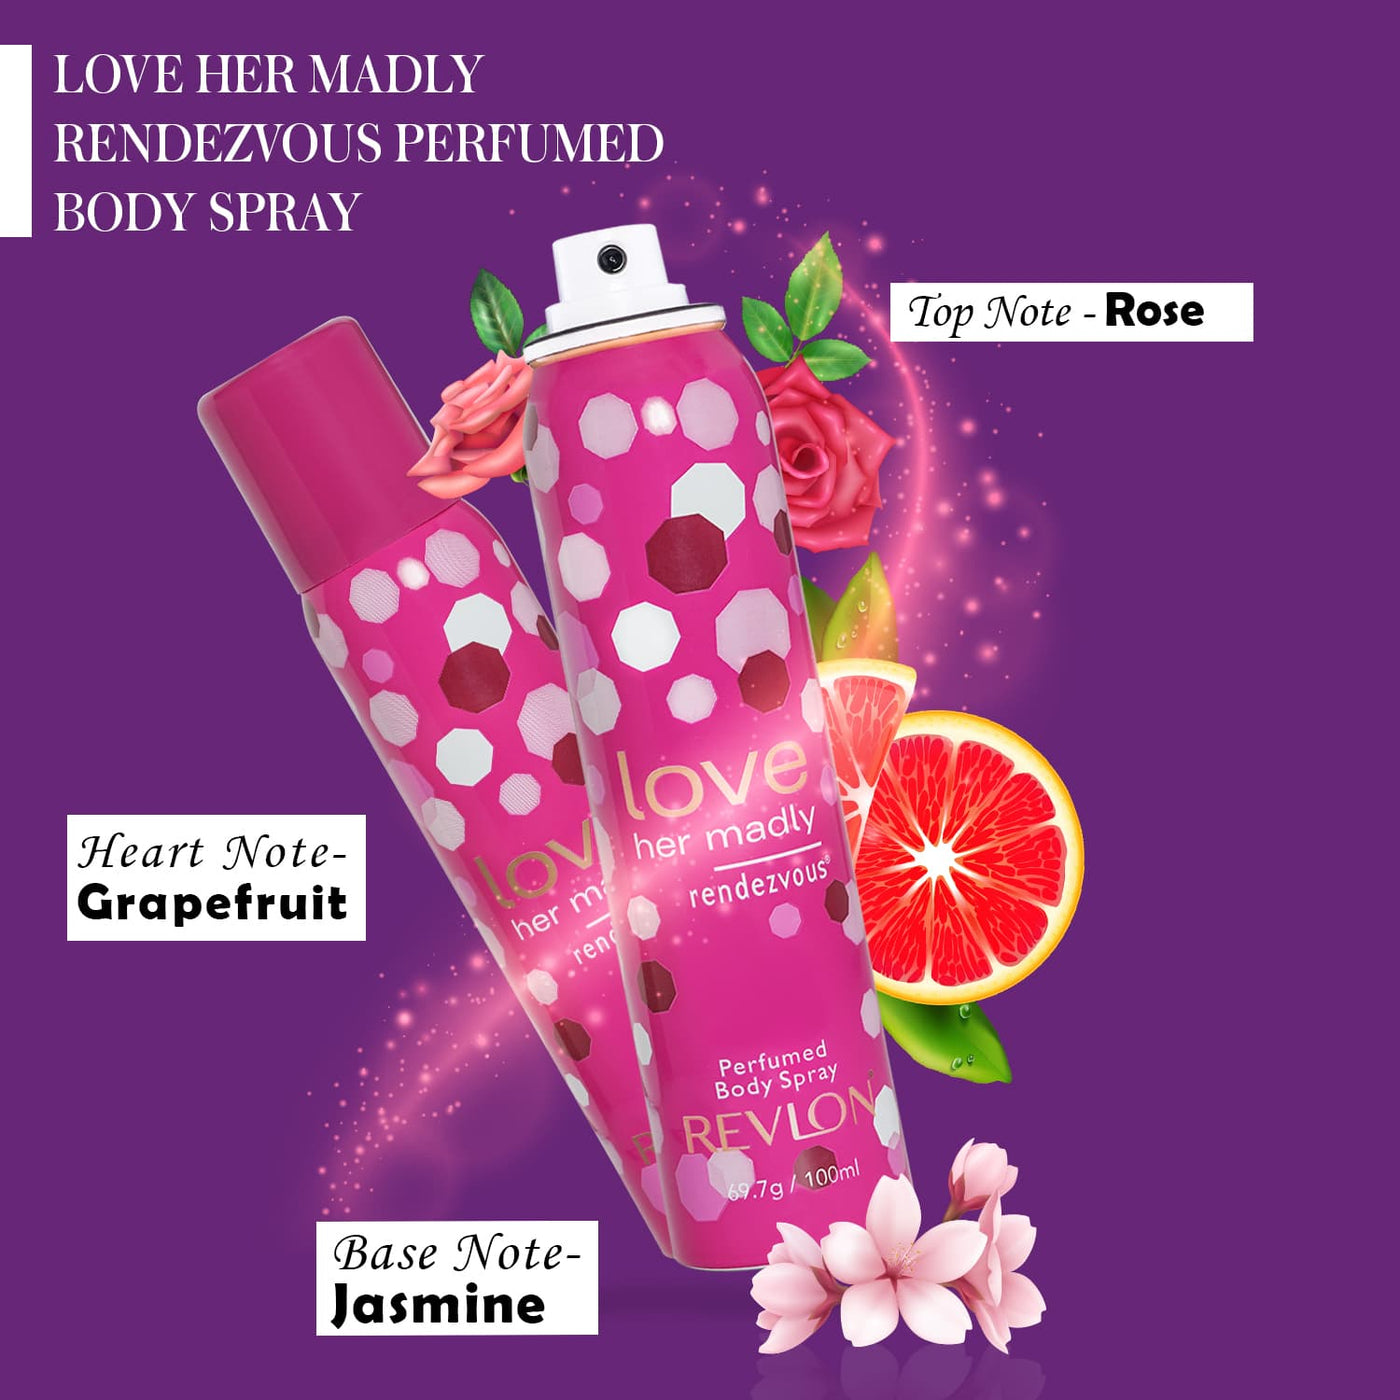 Love Her Madly Rendezvous Perfumed Body Spray